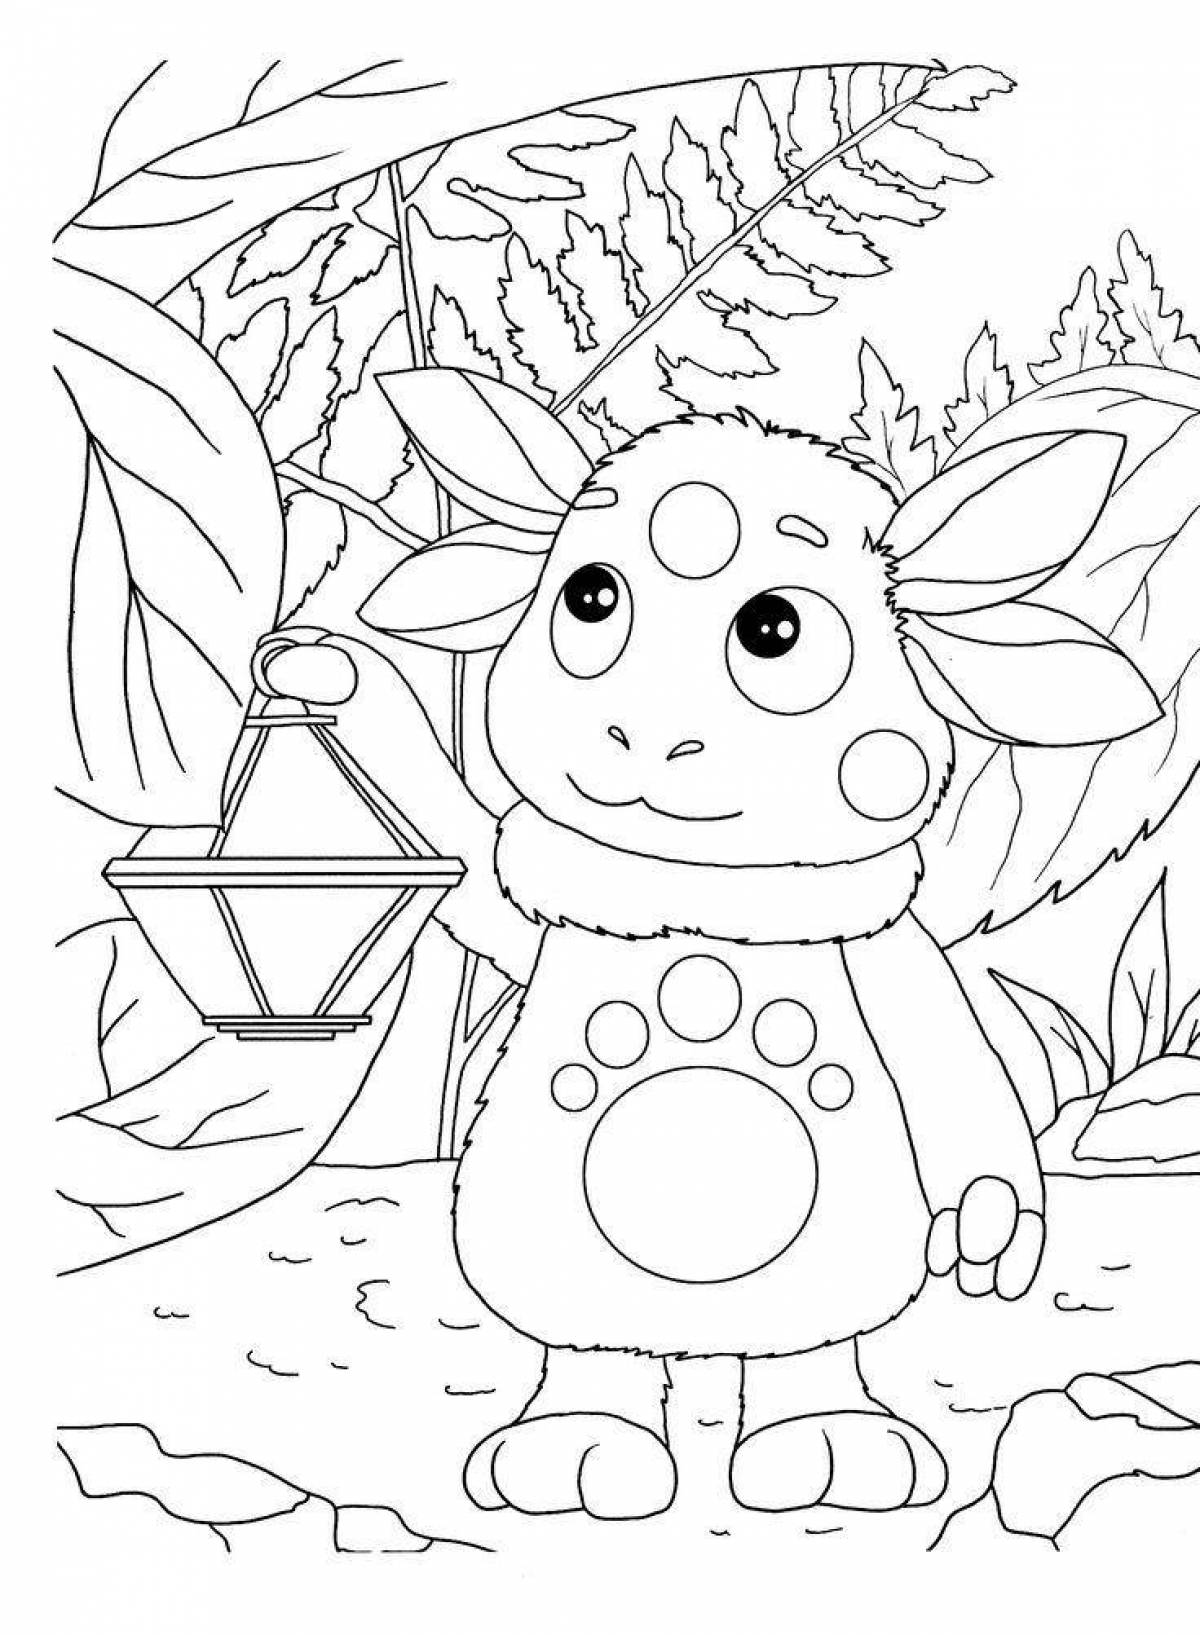 Coloring book blessed Luntik